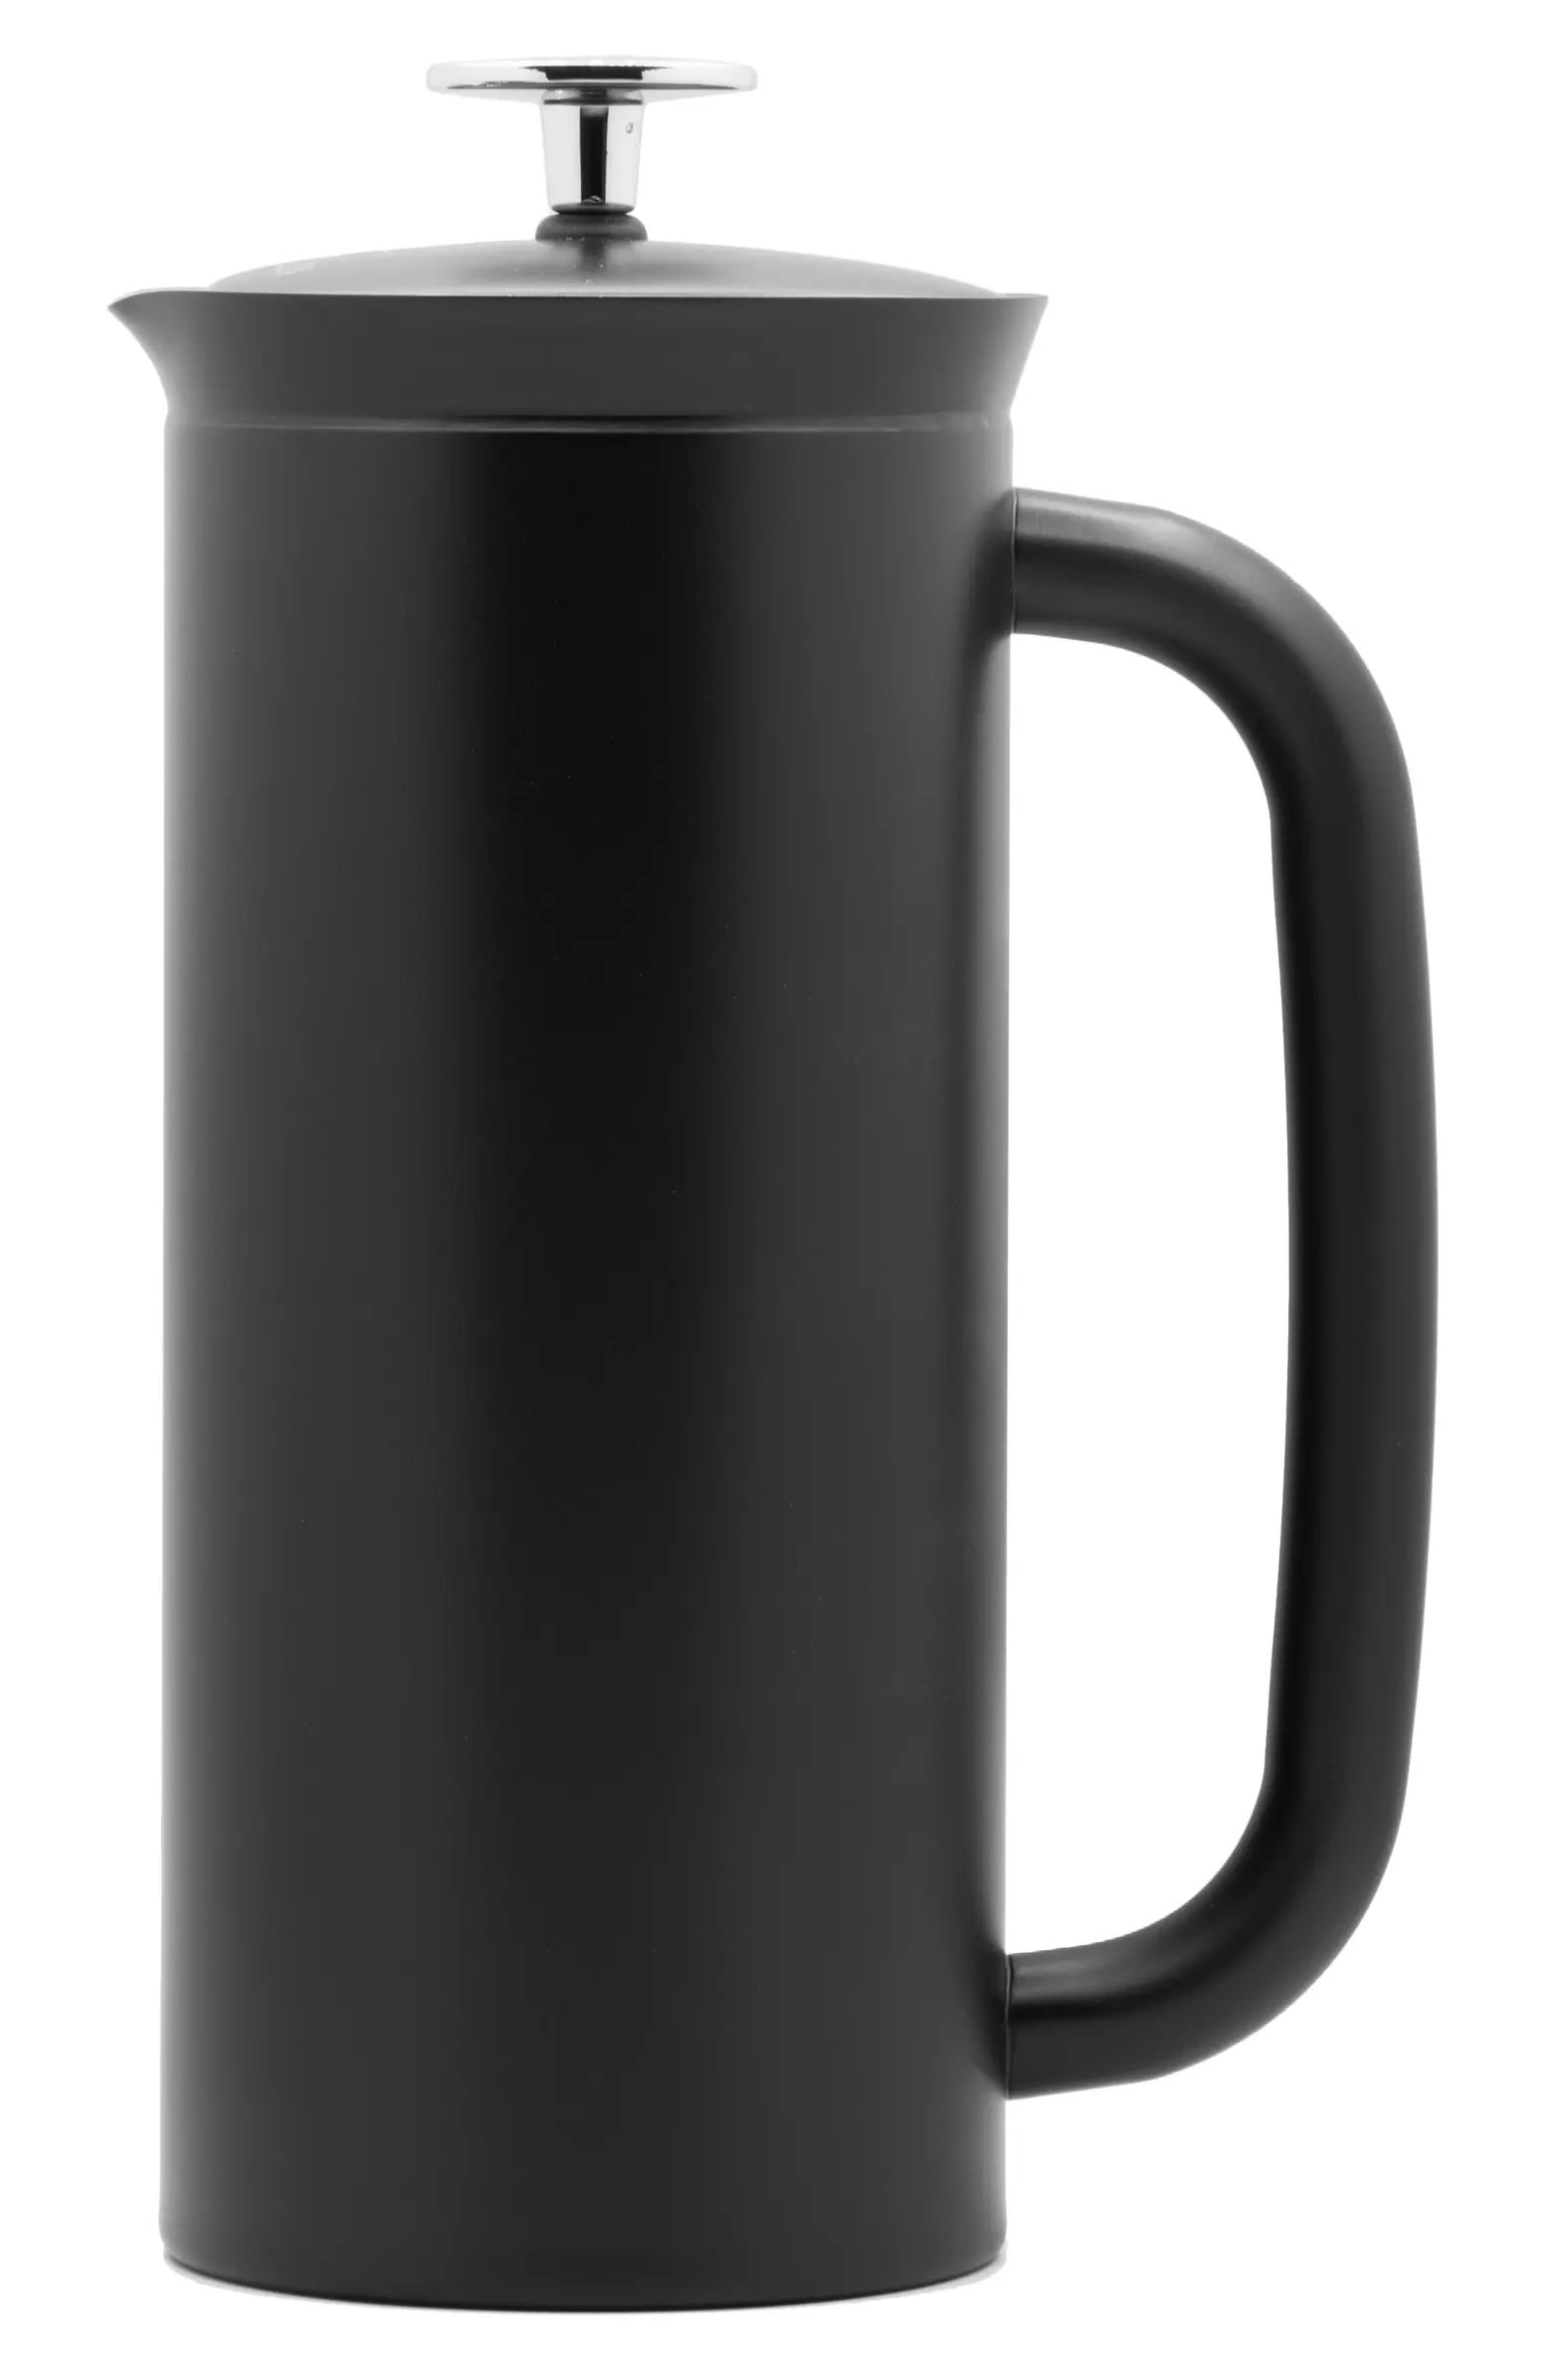 P7 Coffee French Press | Nordstrom